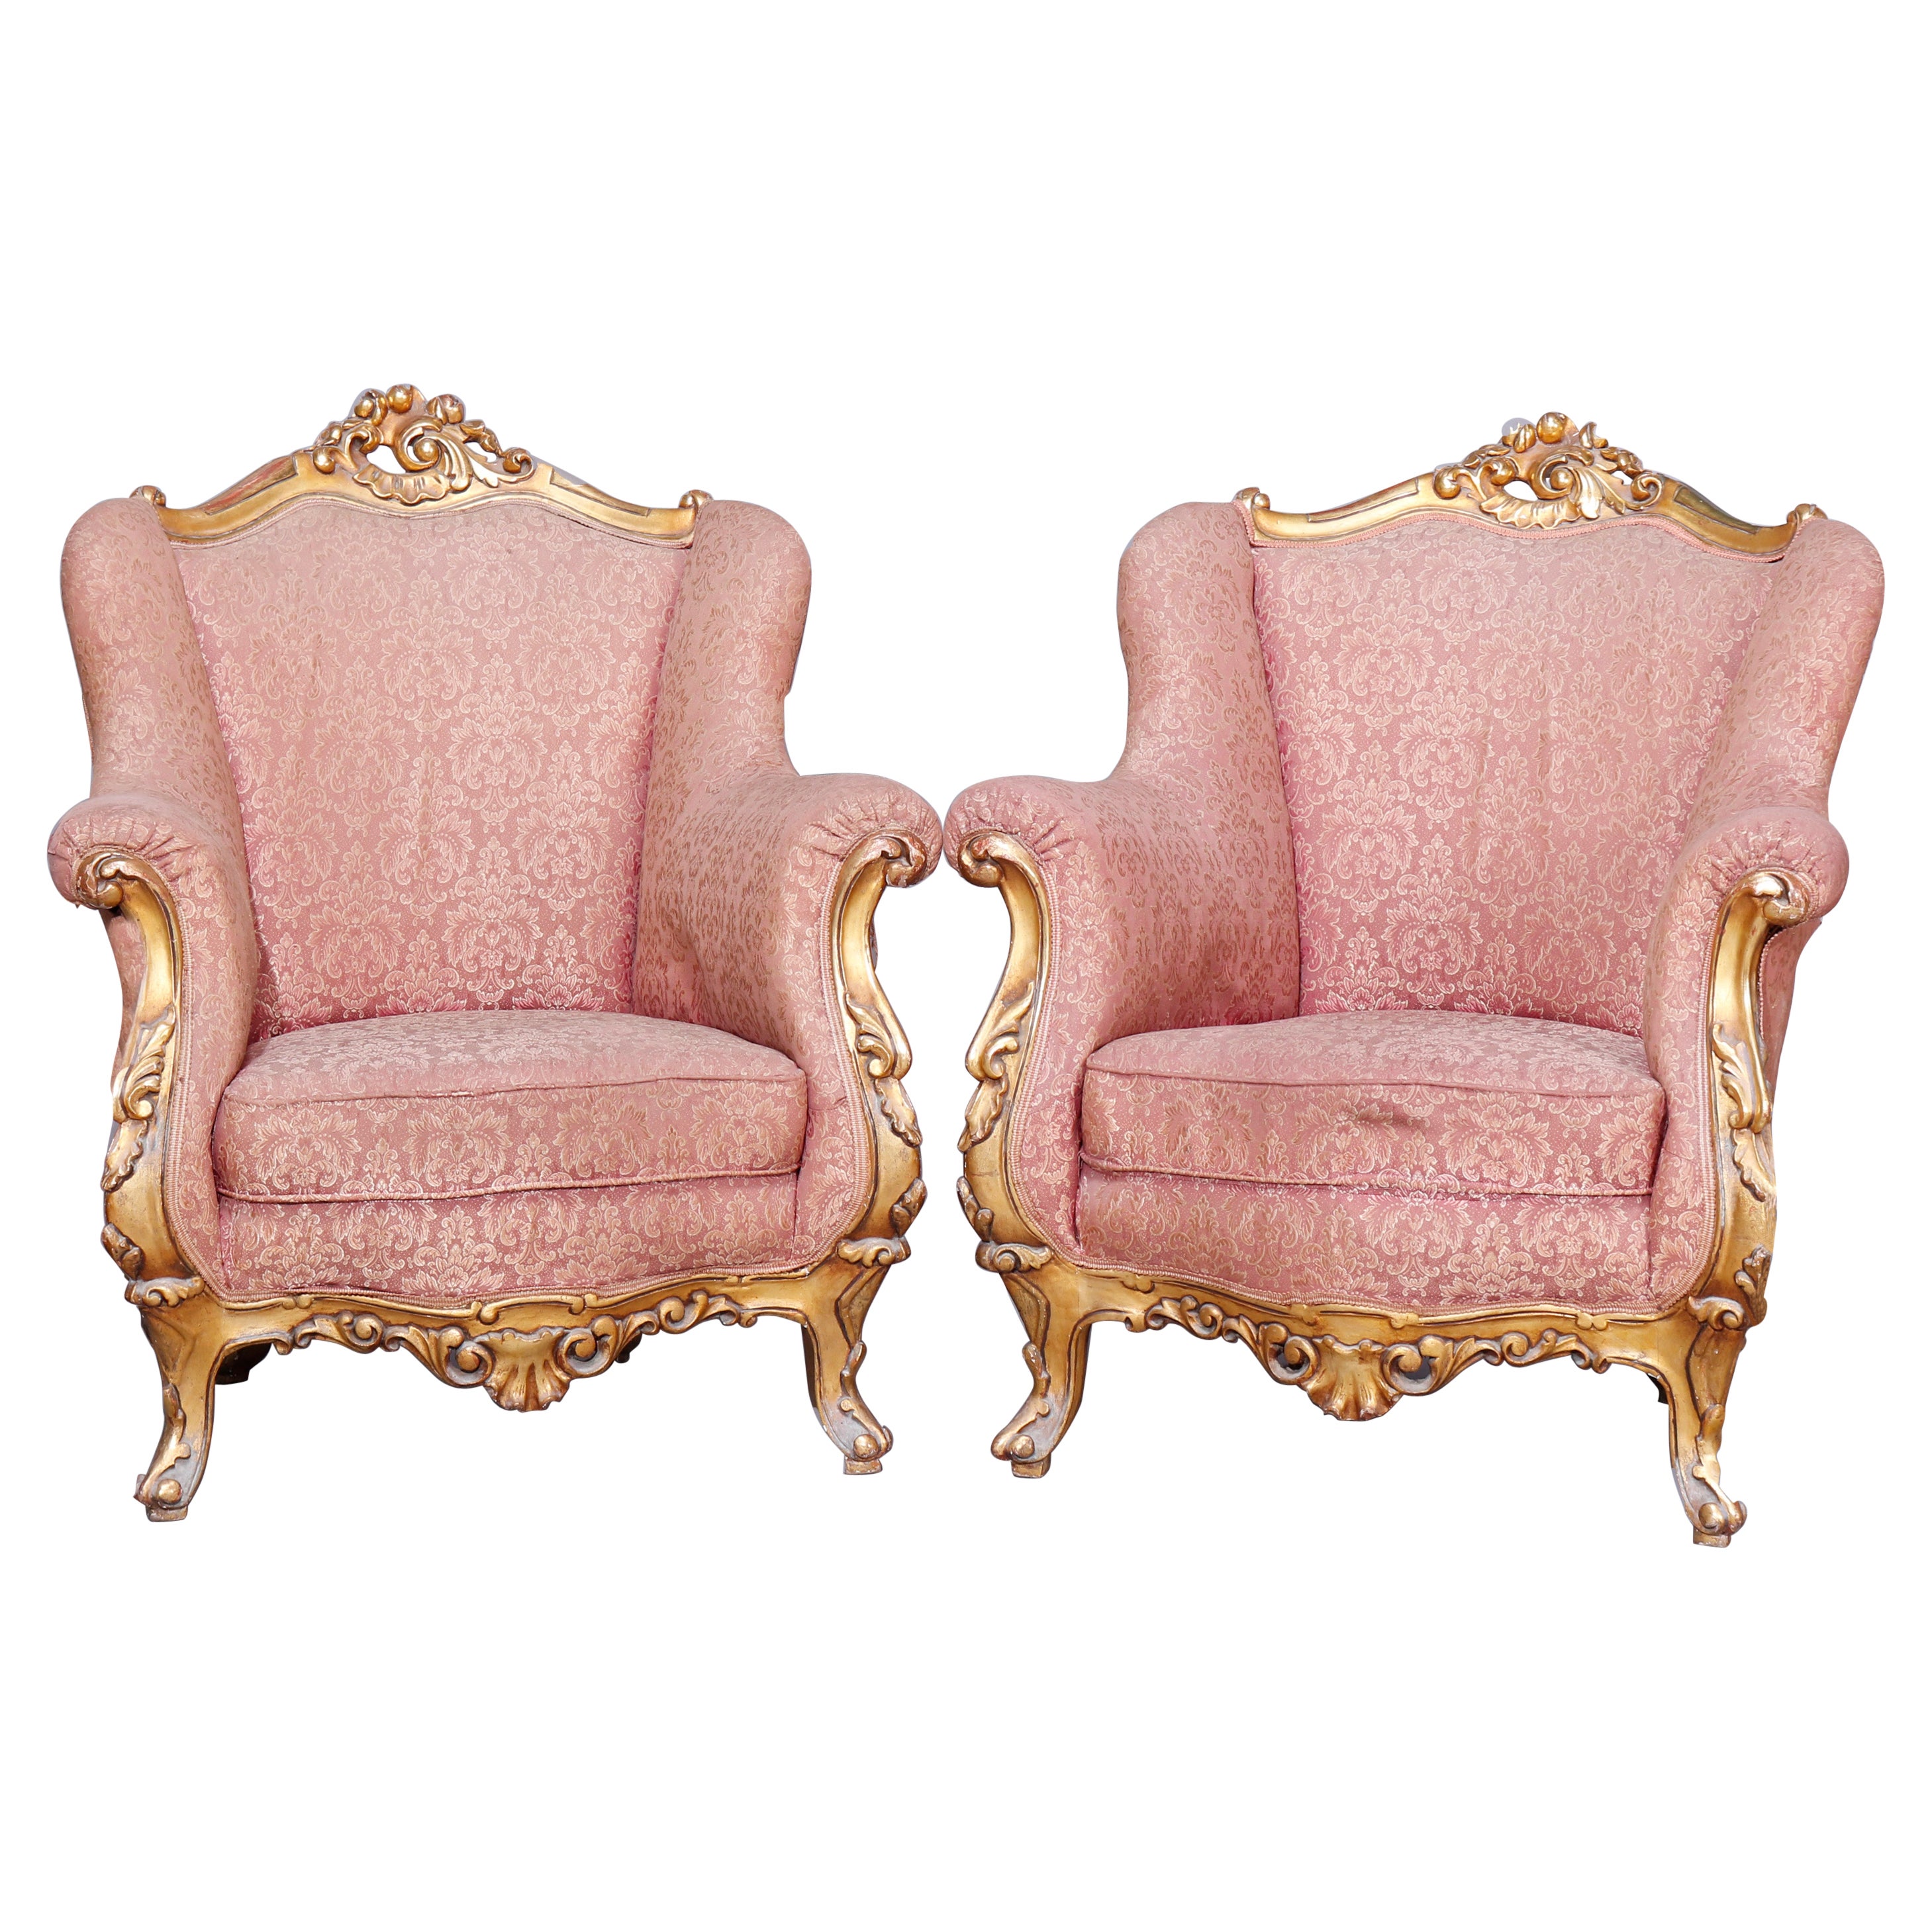 Pair Antique French Louis XIV Gilt Wood Upholstered Wing Back Chairs, Circa 1910